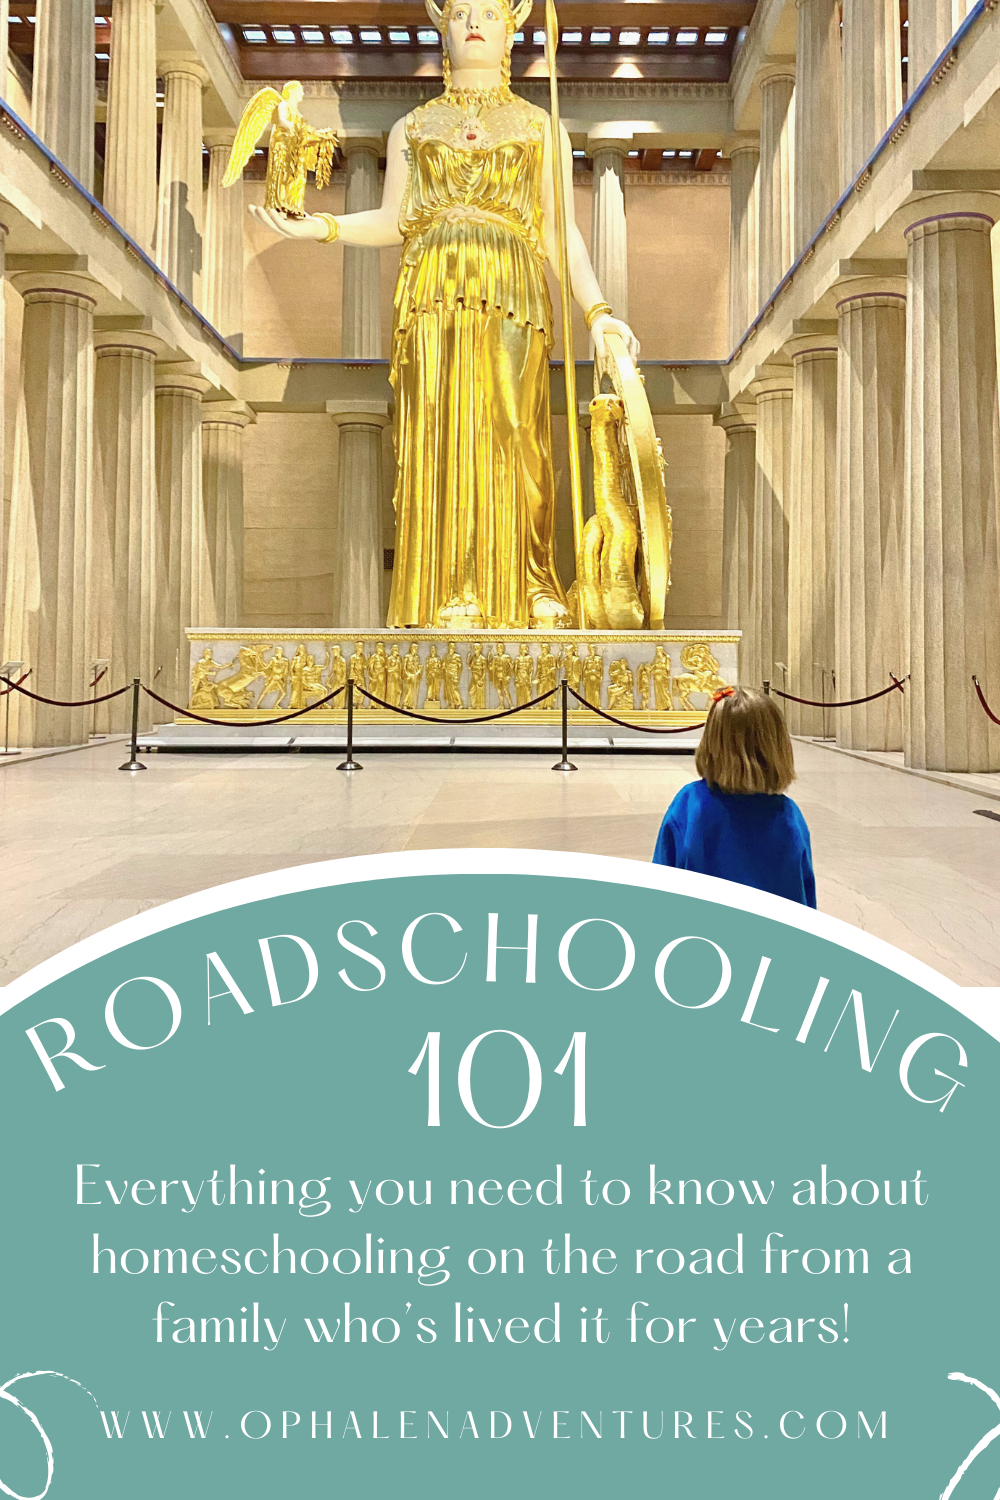 Roadschooling 101: Insider Tips From a Thriving Nomadic Family